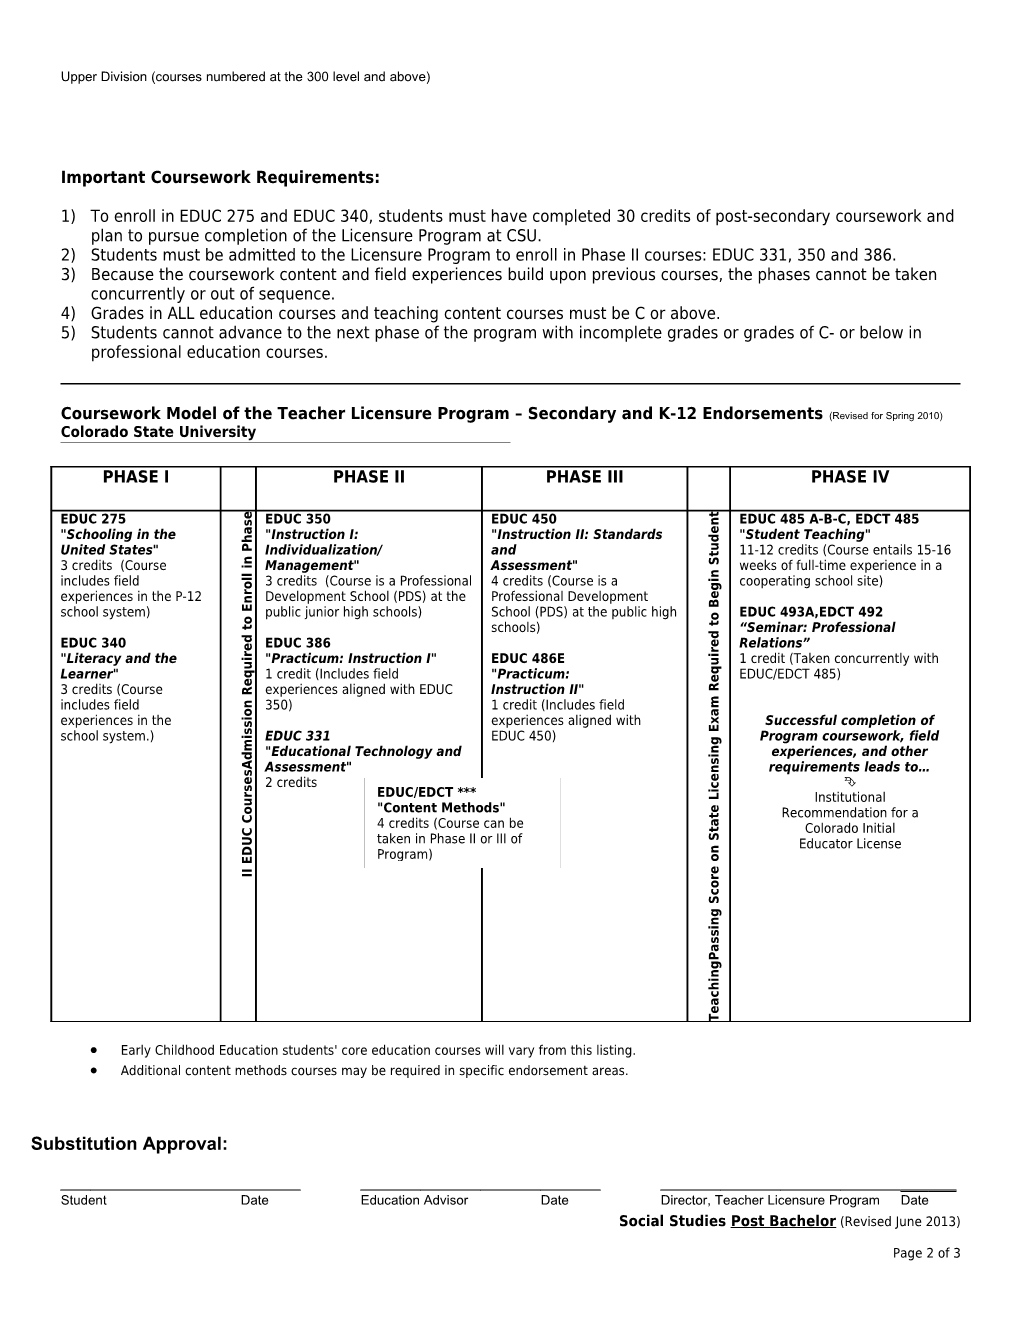 Curriculum Checksheet for POST BACHELOR Candidates